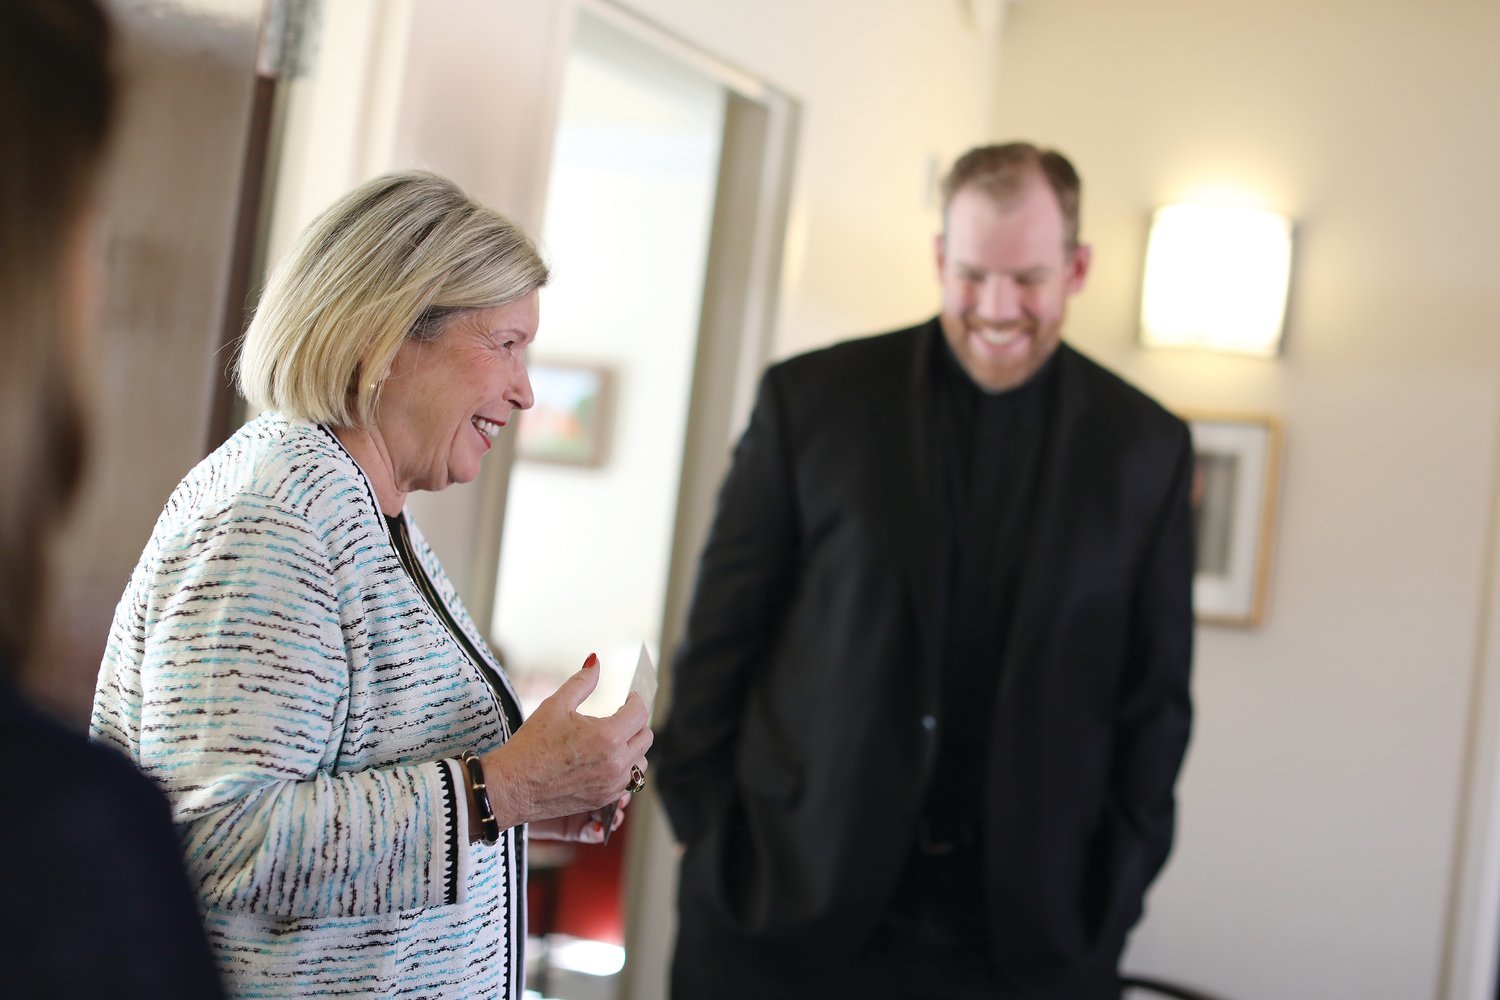 During a special tour of Our Lady of Providence Seminary, Barbara Papitto meets with Father Brian Morris, director of vocations, pictured, and Father Christopher Murphy, rector, in November 2021 when she established a $1 million endowment grant with the Catholic Foundation of Rhode Island to support priestly formation.